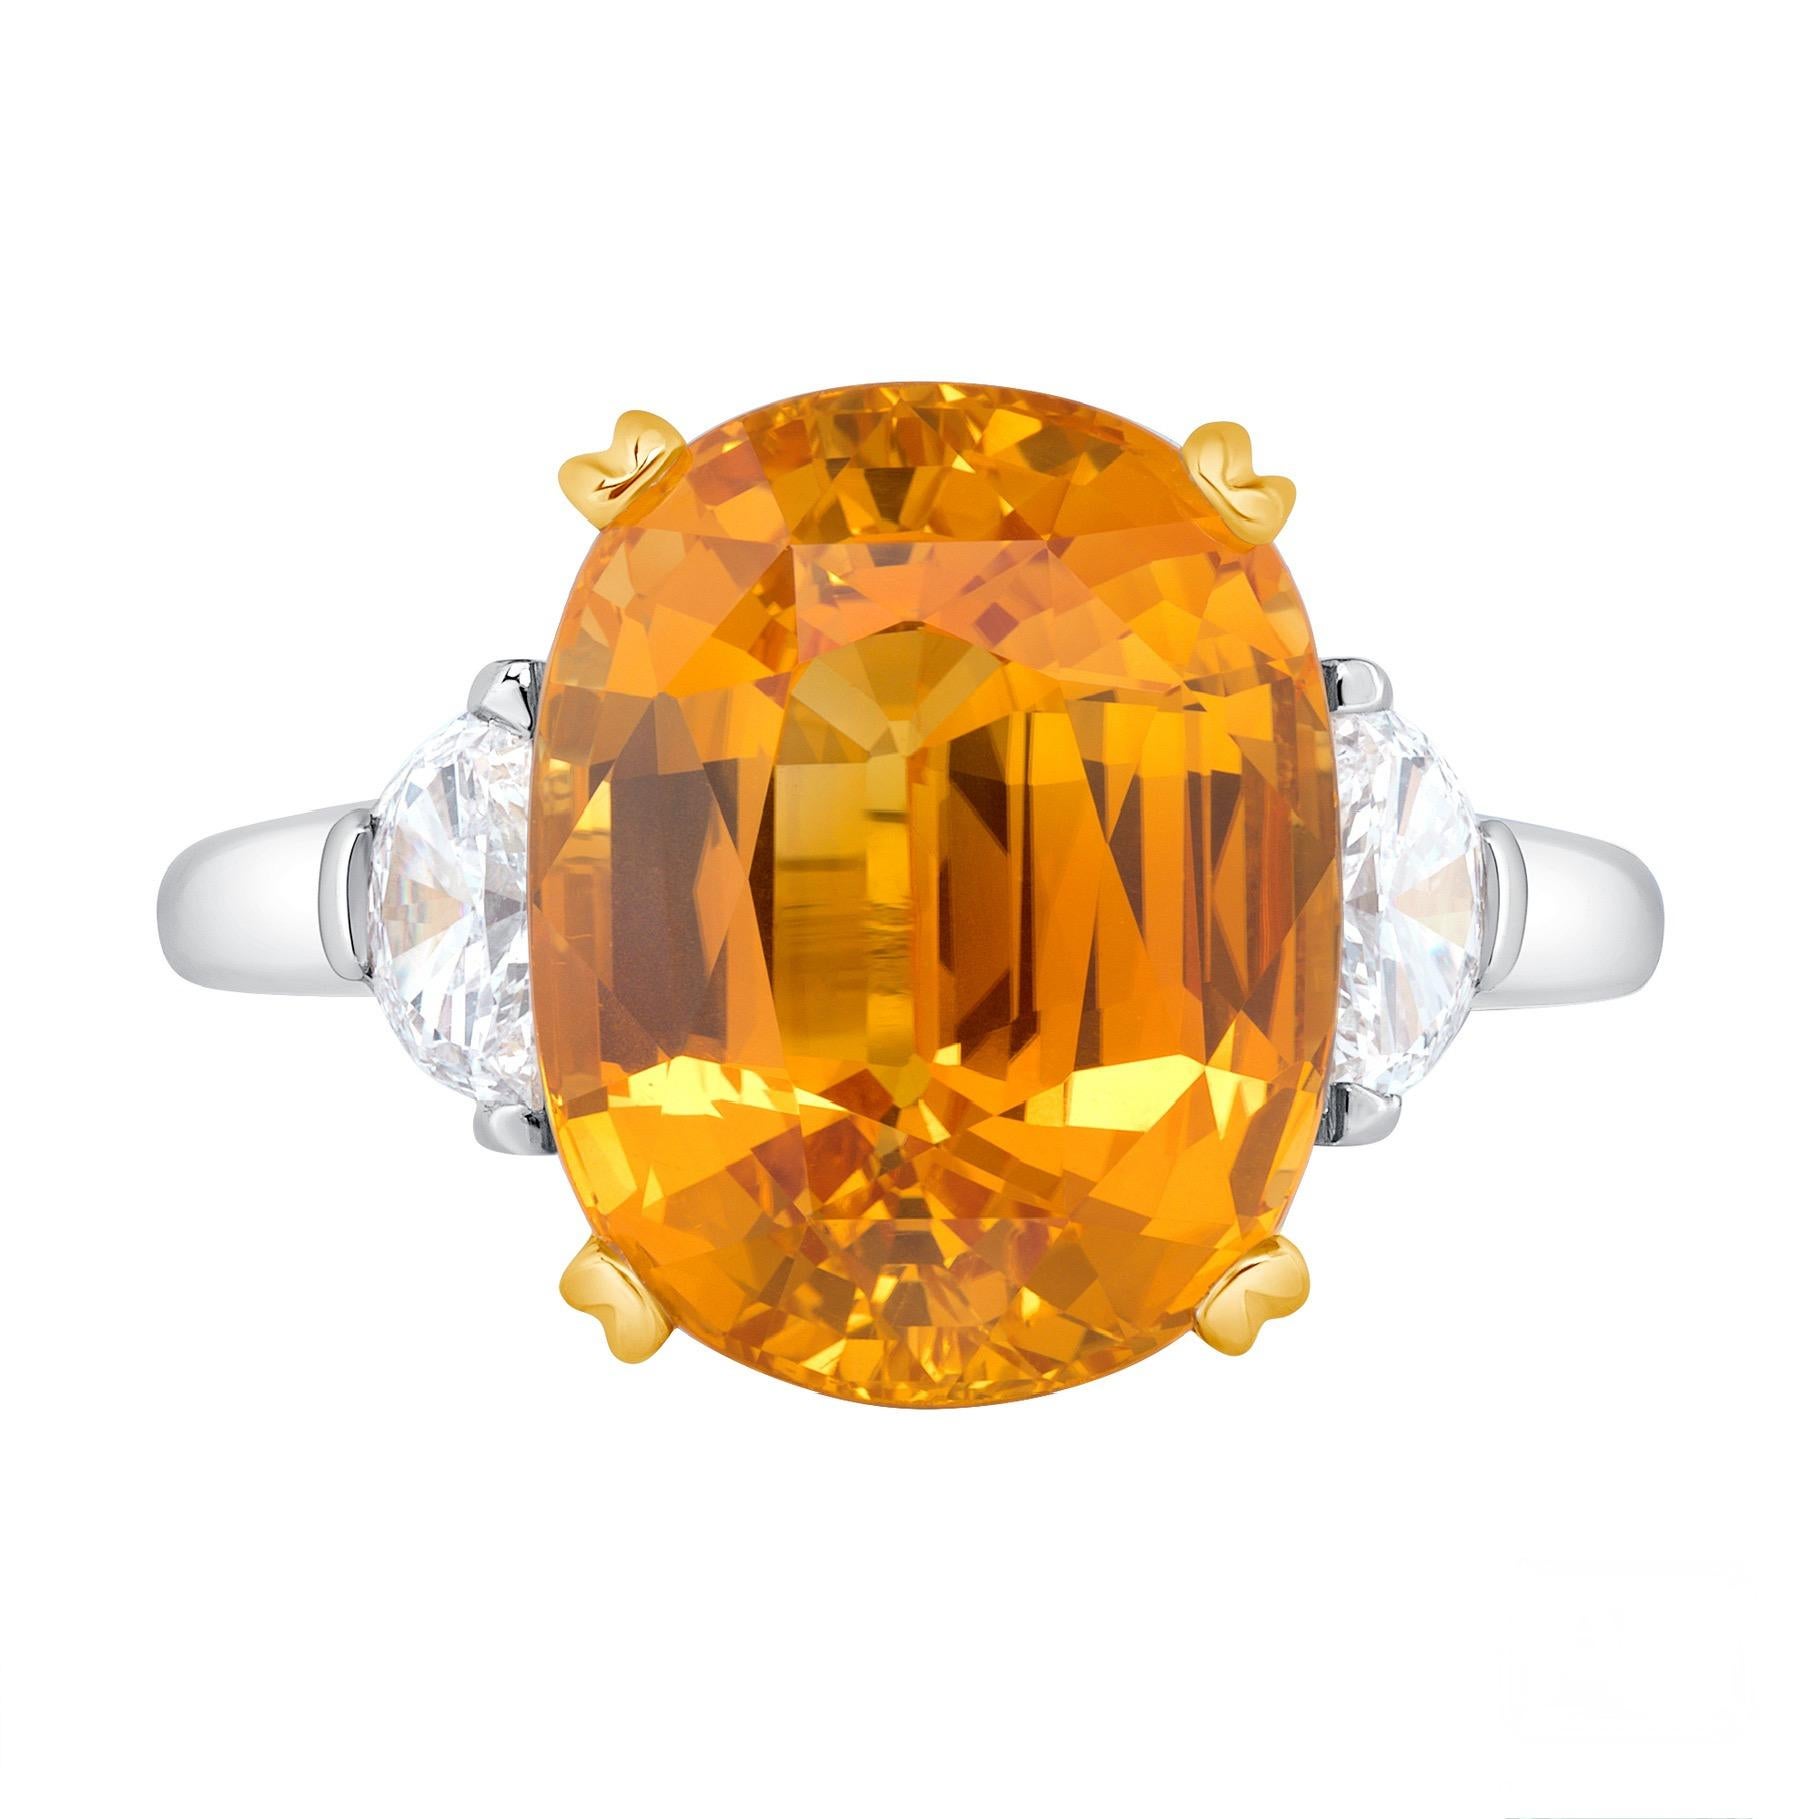 An enriching 10.78-carat honey-yellow sapphire from Sri-Lanka makes a dazzling display in this beauteous ring. The awe-inspiring sapphire is flanked by two half-moon cut diamonds totaling 0.52ct. Fabricated in platinum with 18K yellow gold. The